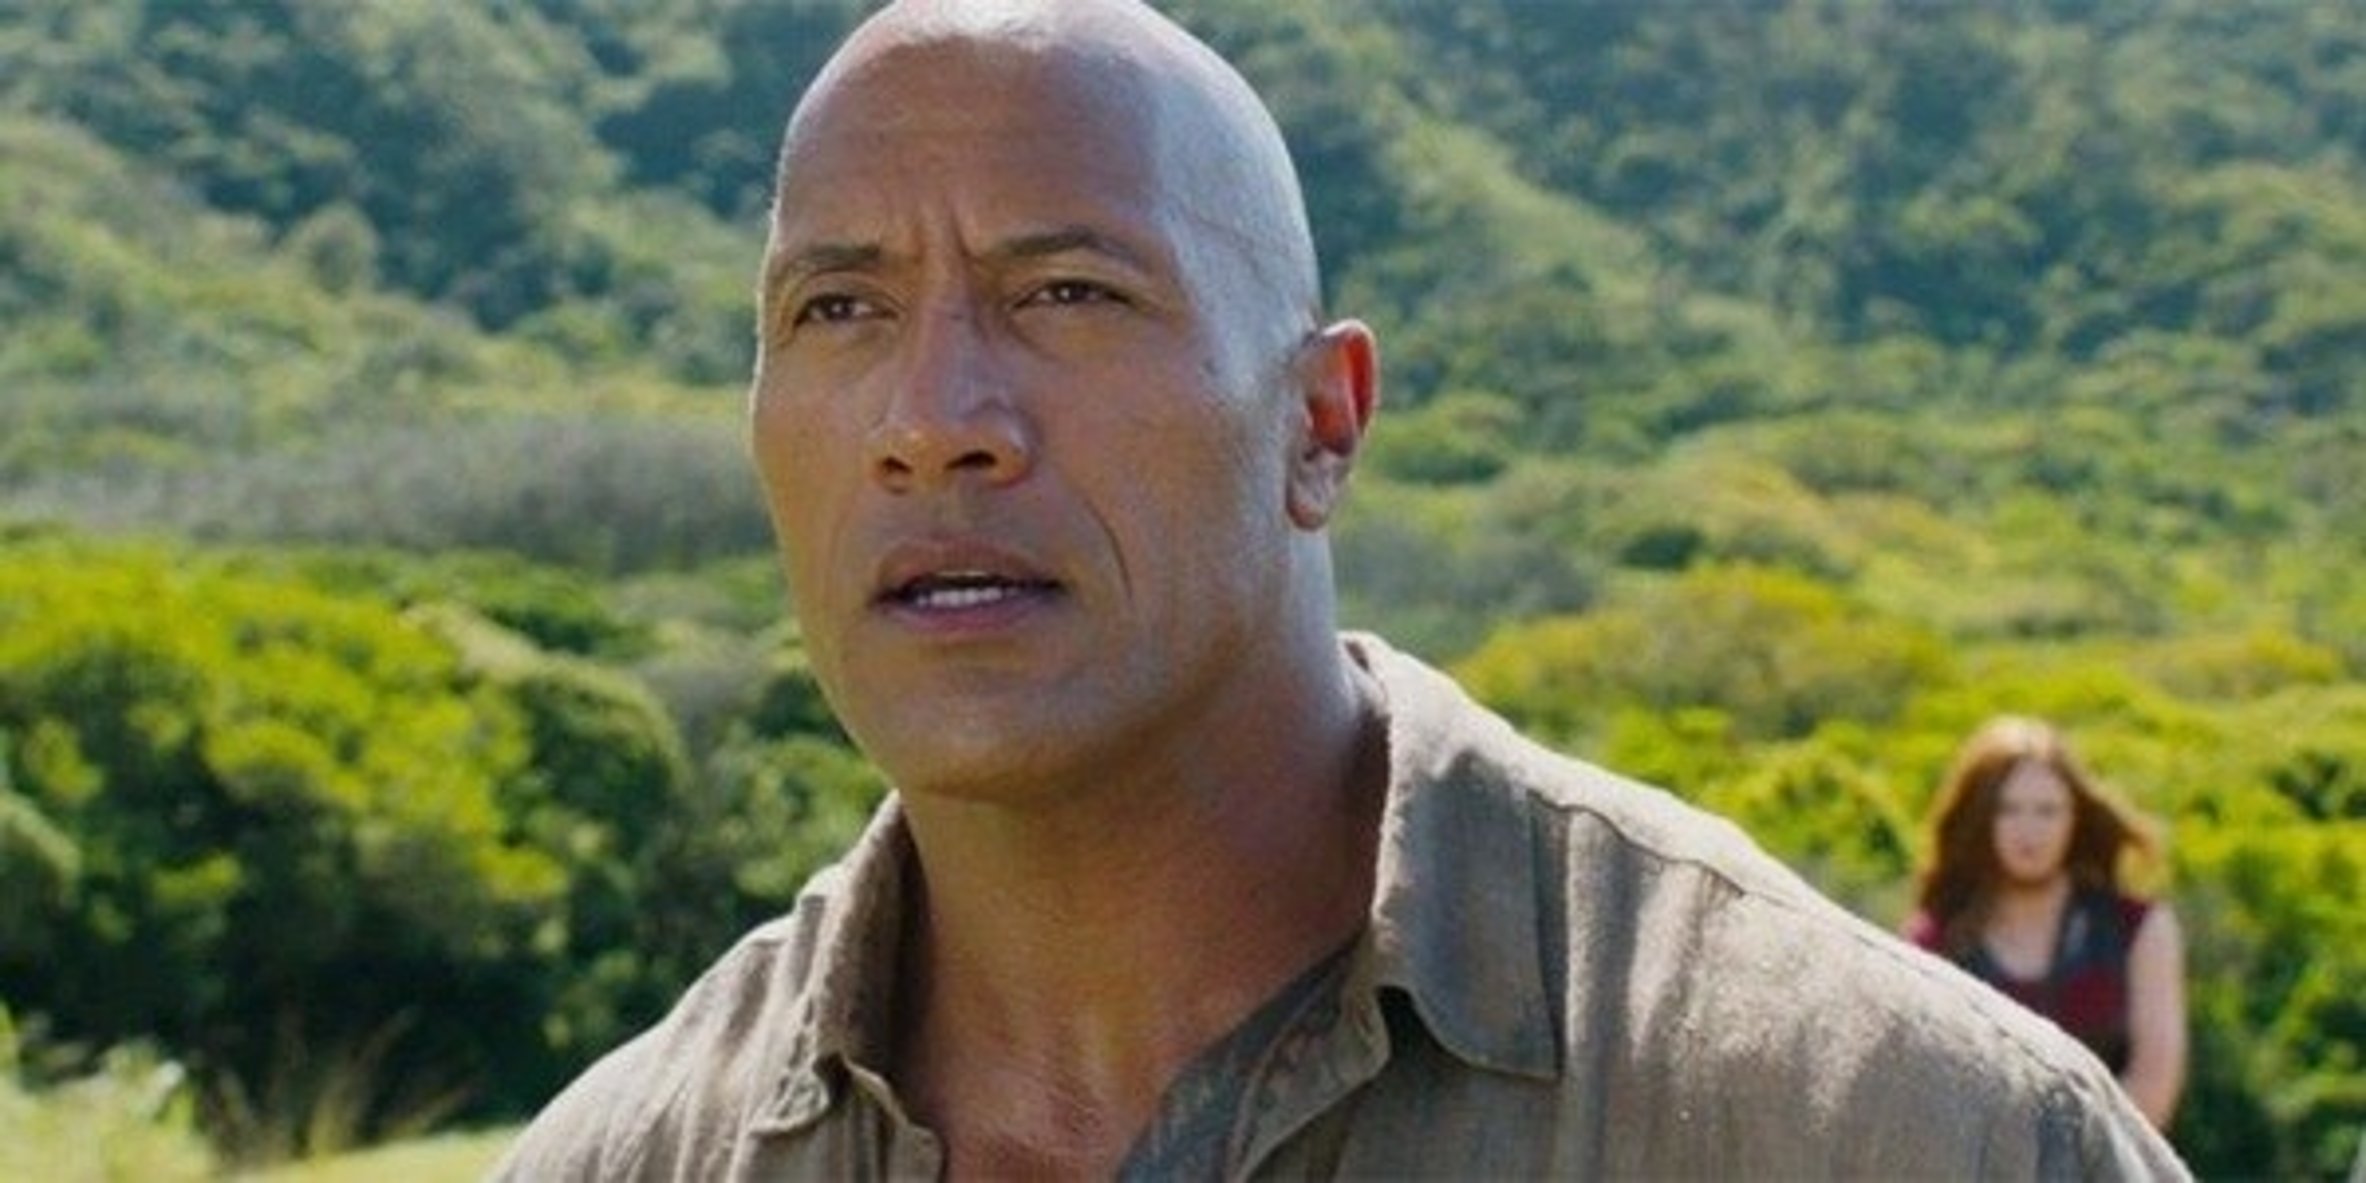 Jumanji And The Jurassic Park Franchise Have A Cool Connection, According To The Rock